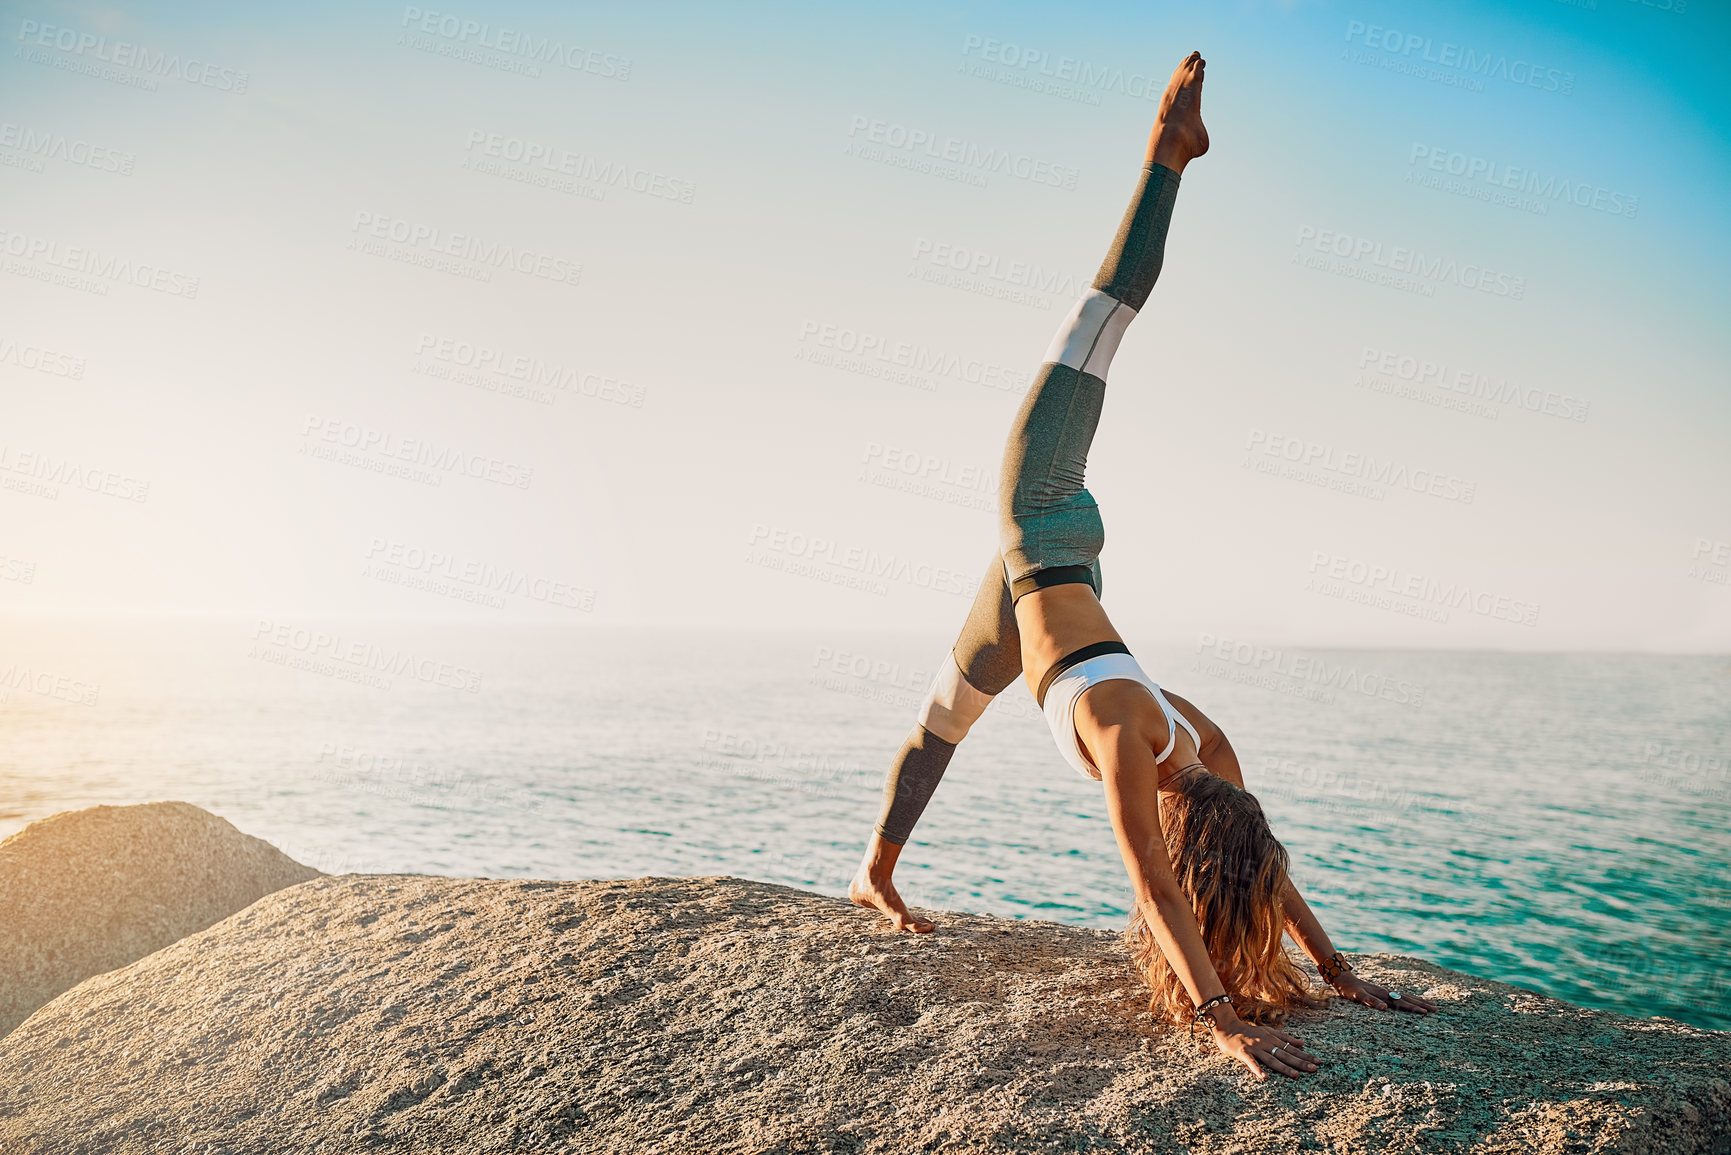 Buy stock photo Shot of an athletic young woman practicing yoga on the beach